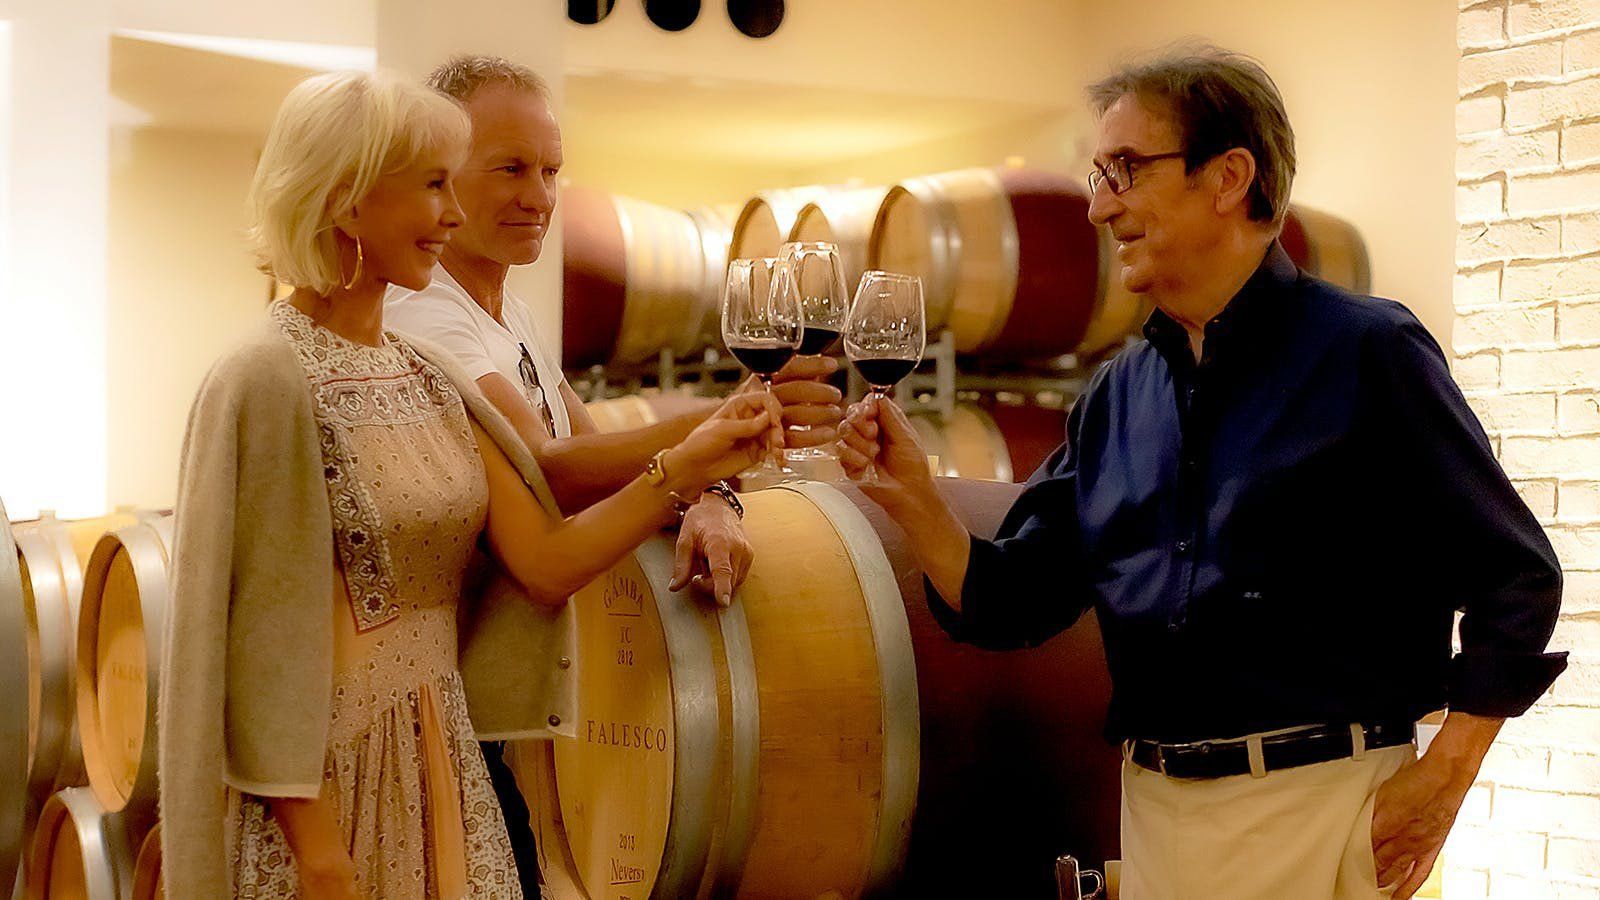 Il Palagio - Cellar Tasting, Rockstar Sting, actress and directress Trudie Styler and consulting winemaker Riccardo Cotarella